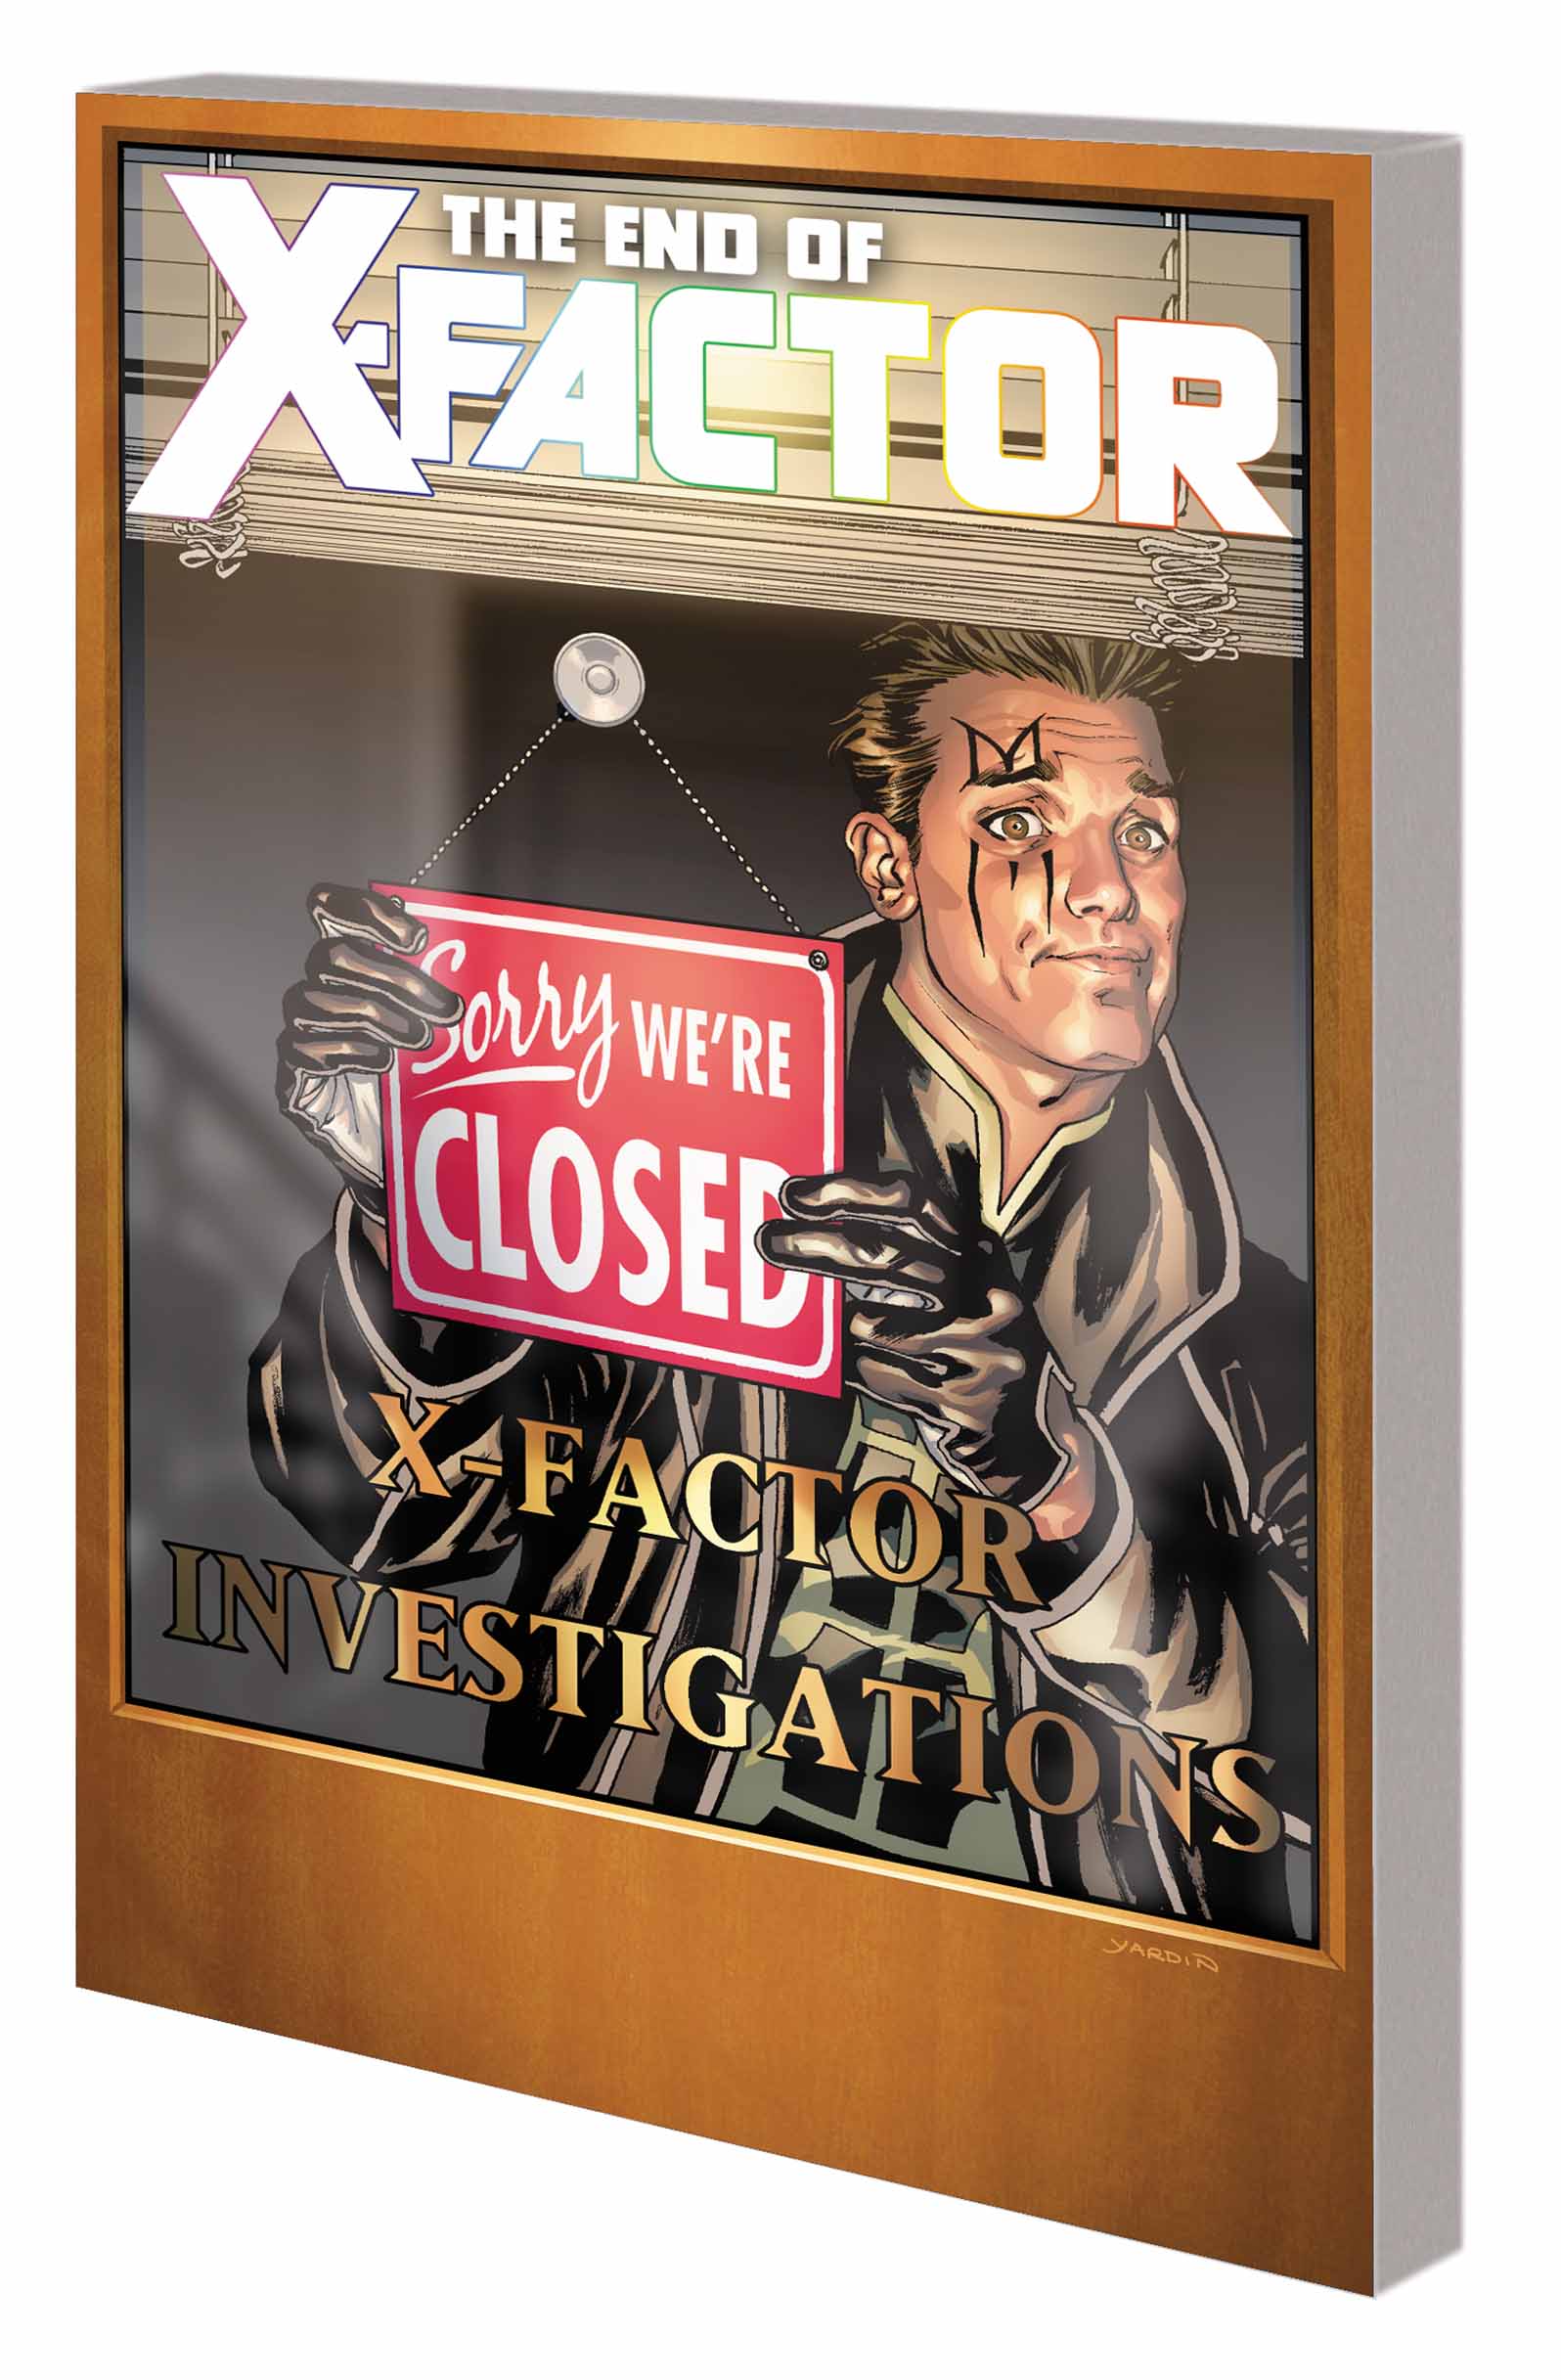 X-FACTOR VOL. 21: THE END OF X-FACTOR TPB (Trade Paperback)